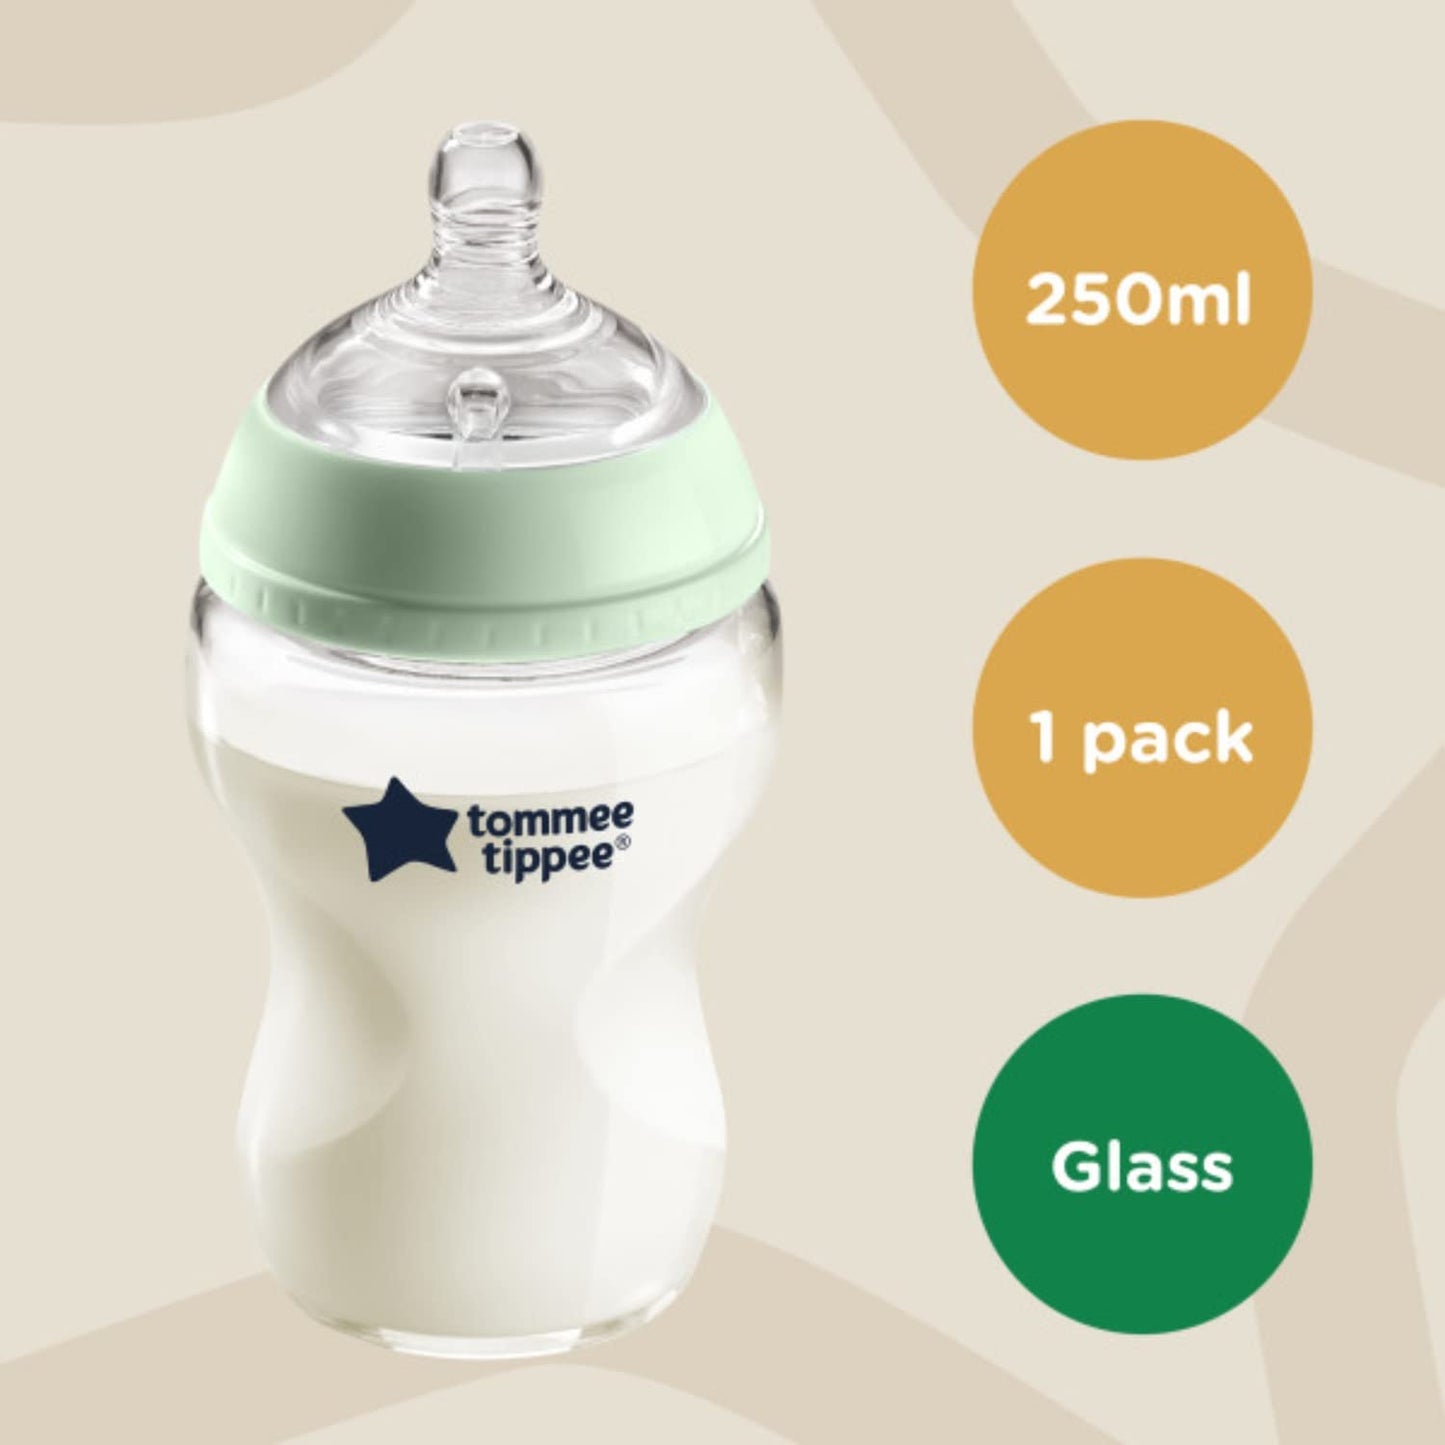 Tommee Tippee Tt42243877 Closer To Nature Glass Bottle, 250 ml Clear